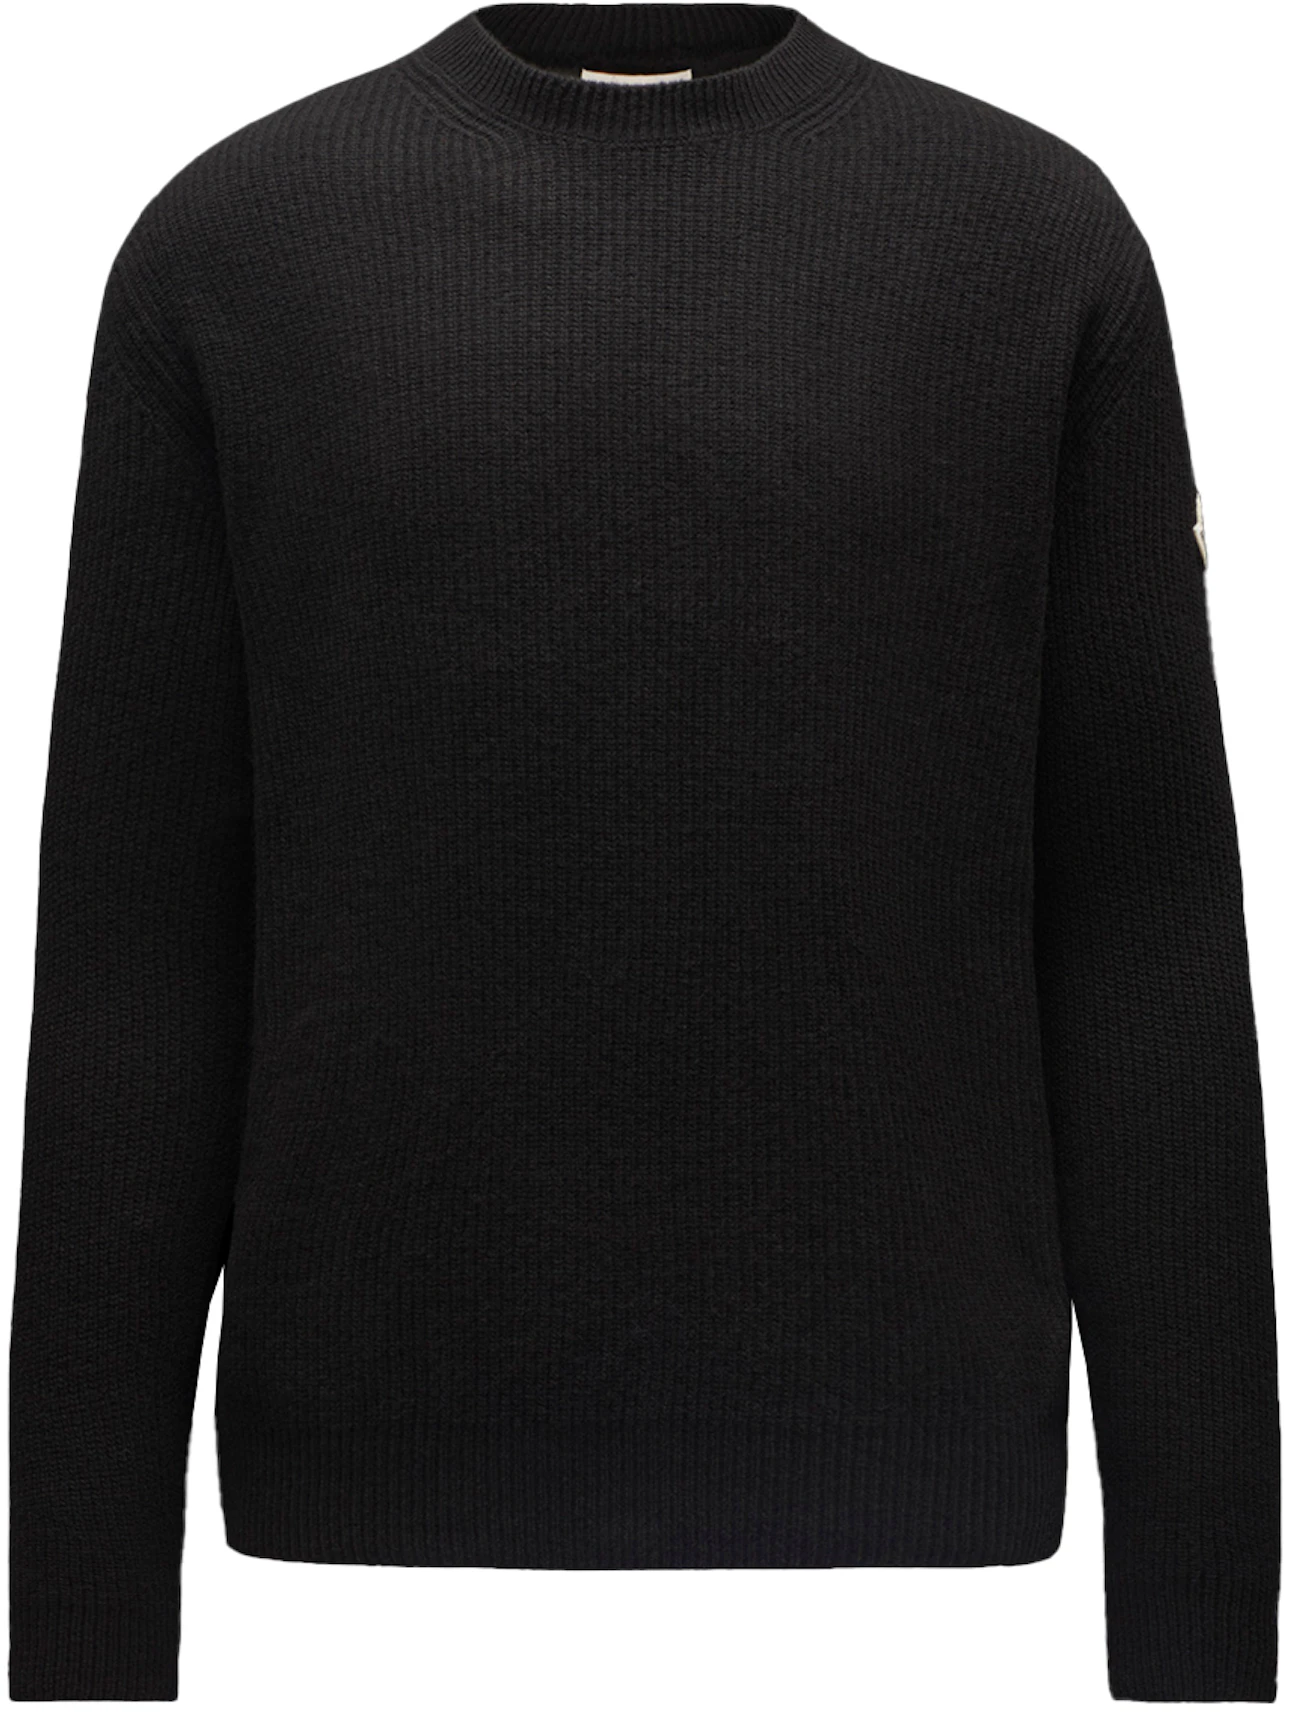 raket Waterfront tilgive Moncler Wool and Cashmere Knit Sweater Black - SS22 - US